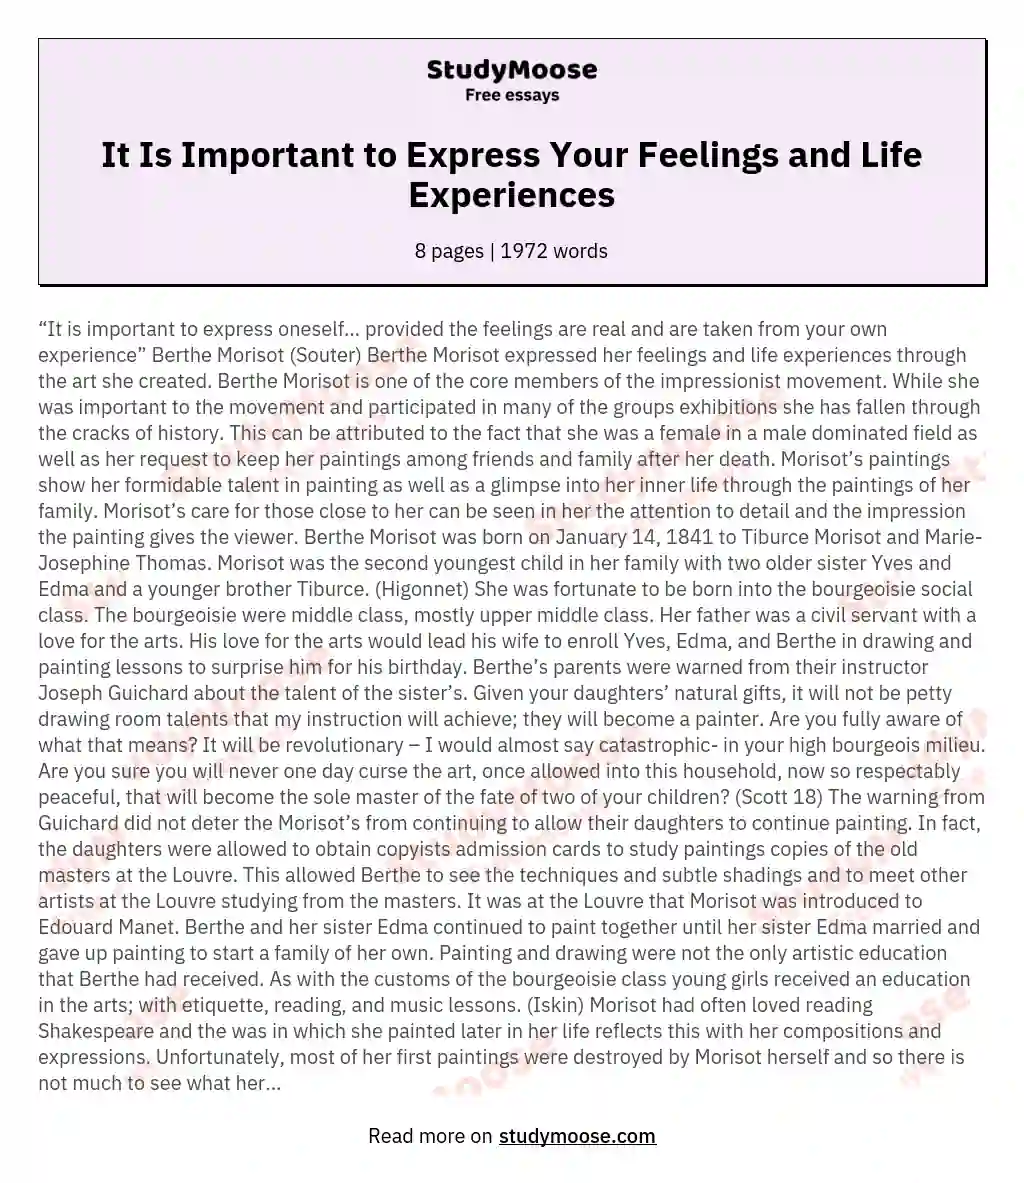 It Is Important to Express Your Feelings and Life Experiences essay